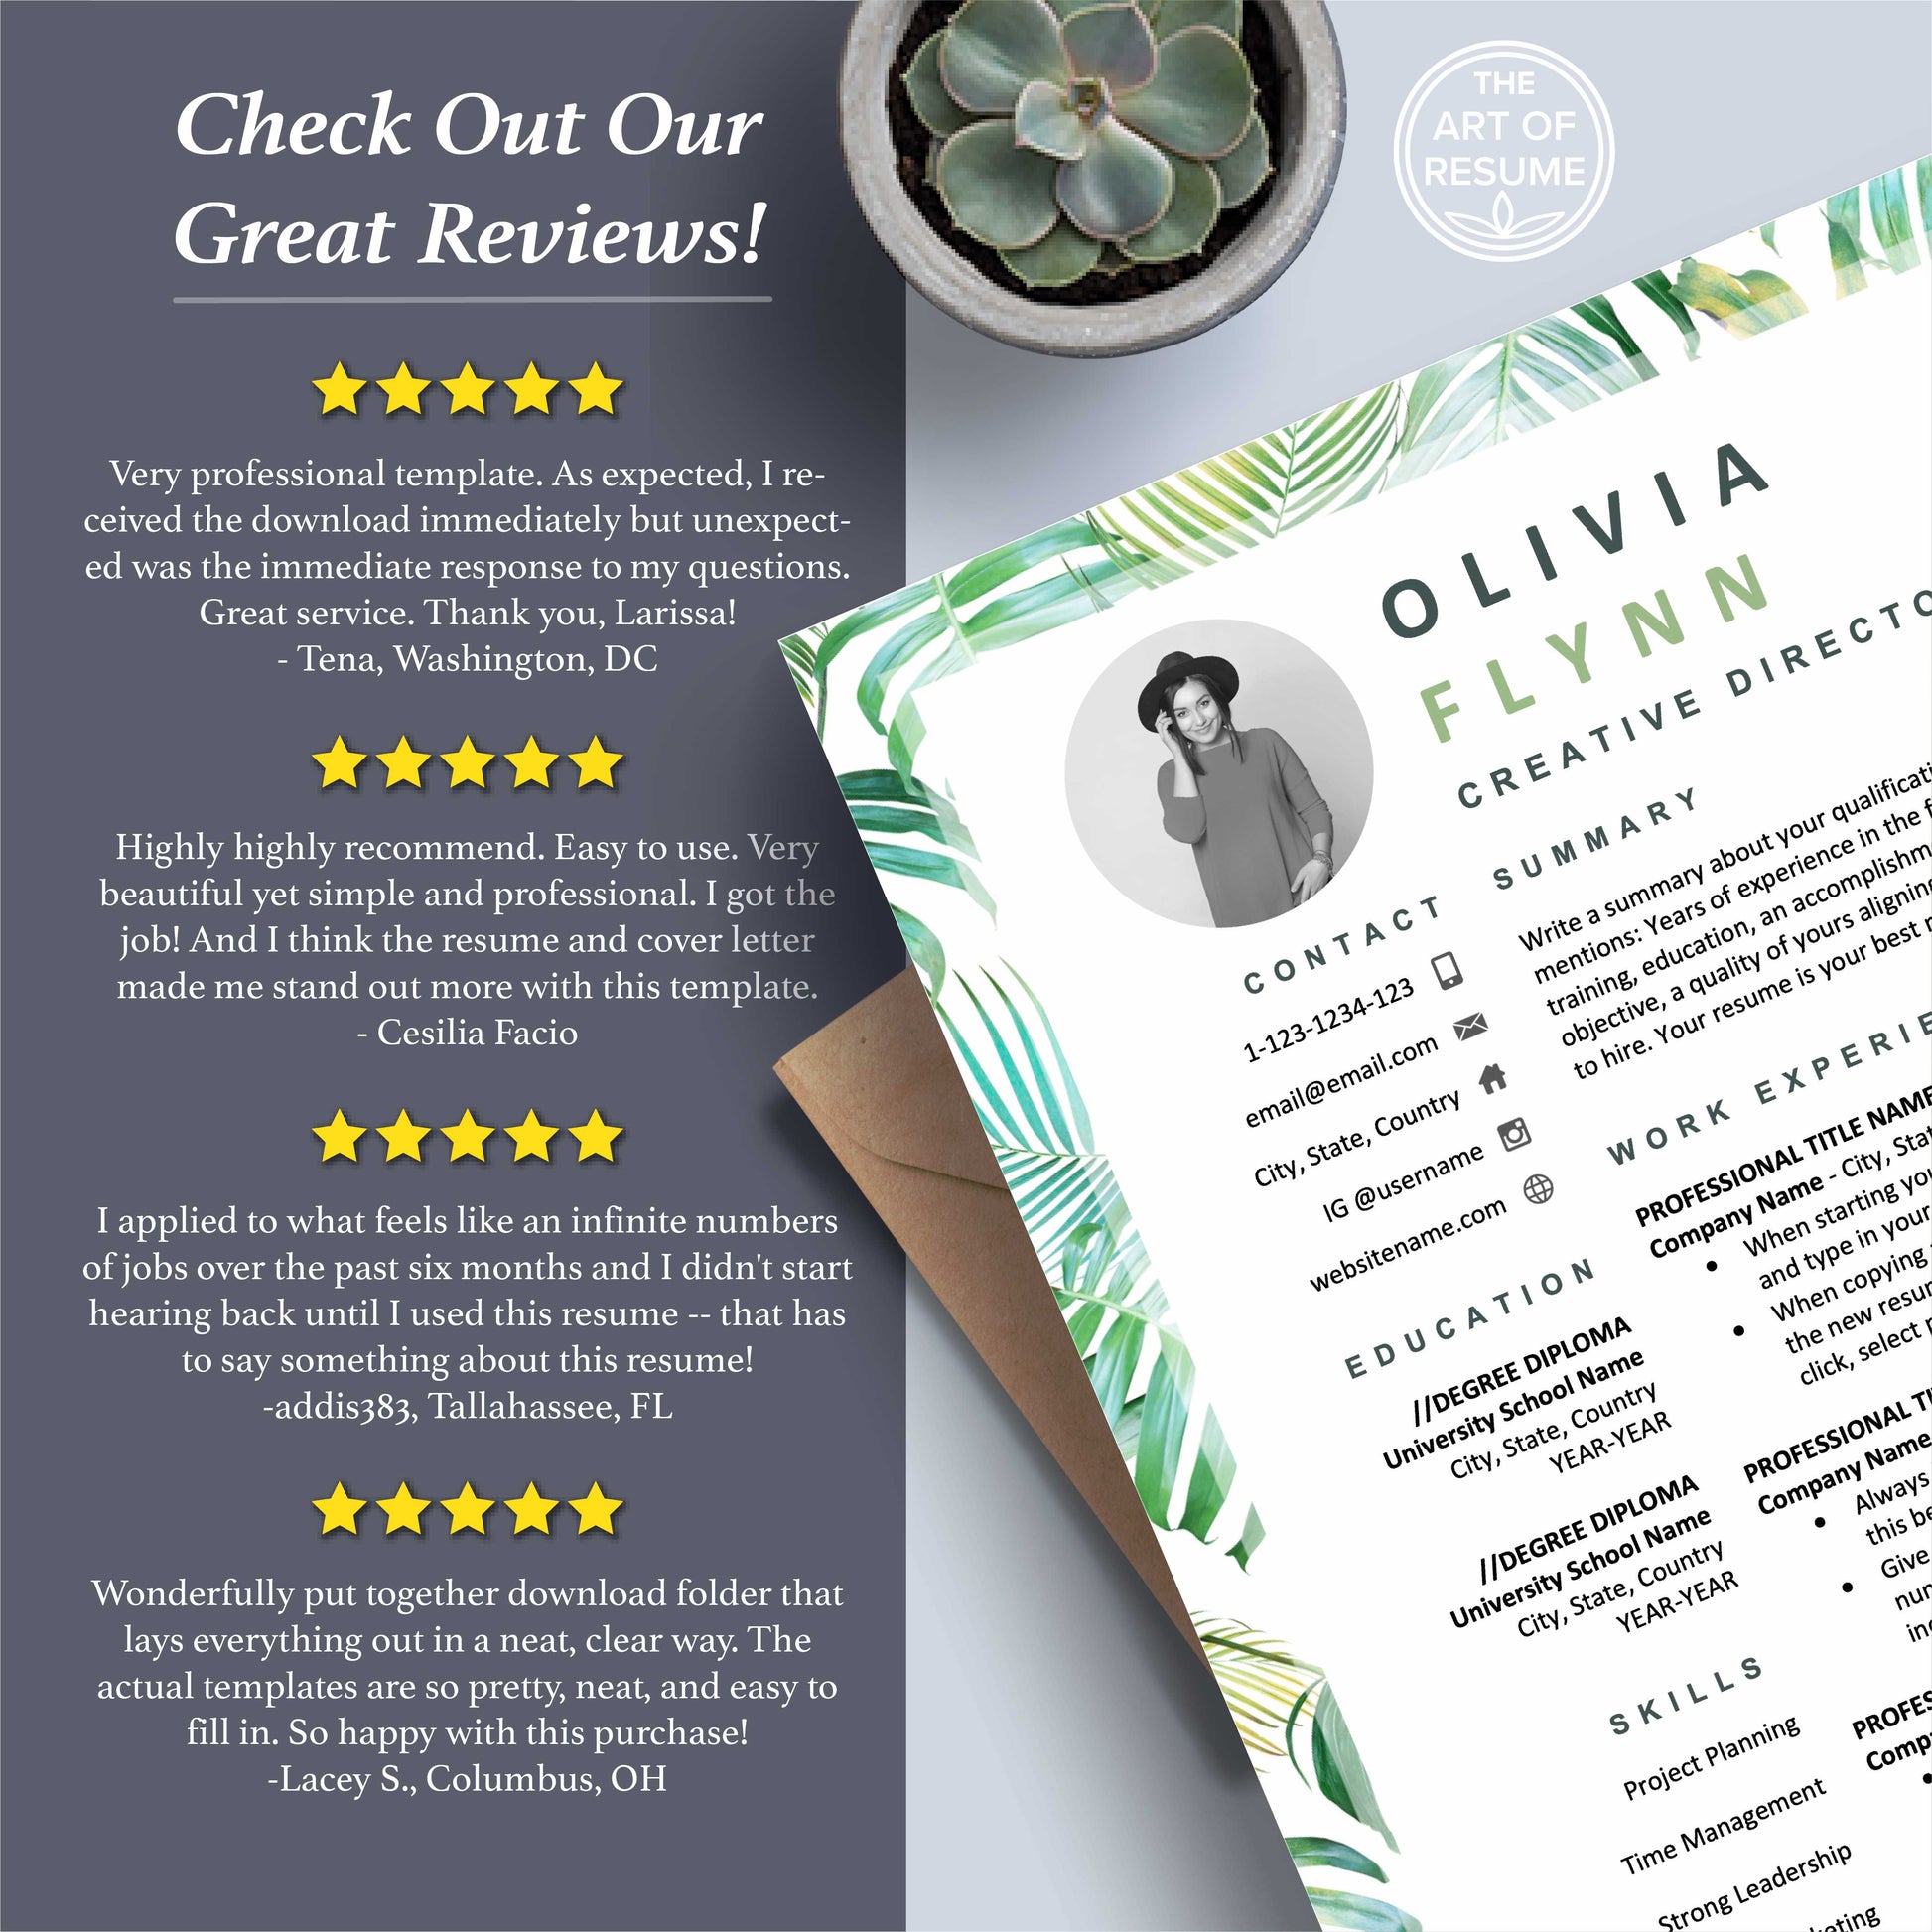 The Art of Resume Templates | Creative Tropical Green Resume CV Templates Online 5-Star Reviews